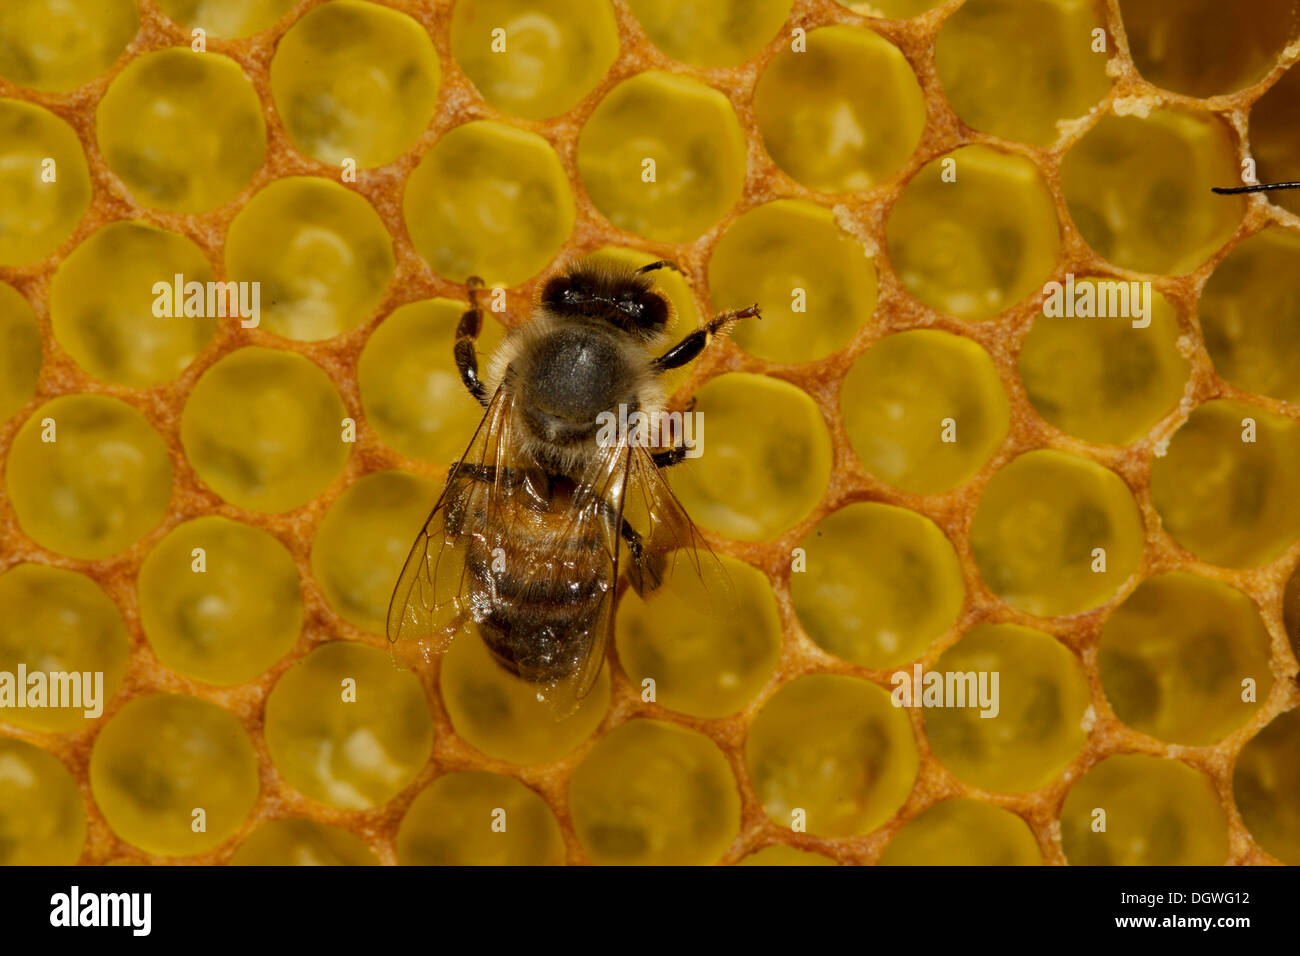 Western Honey Bee (Apis mellifera), worker on honeycomb with newly hatched larvae in brood cells, Thuringia, Germany Stock Photo